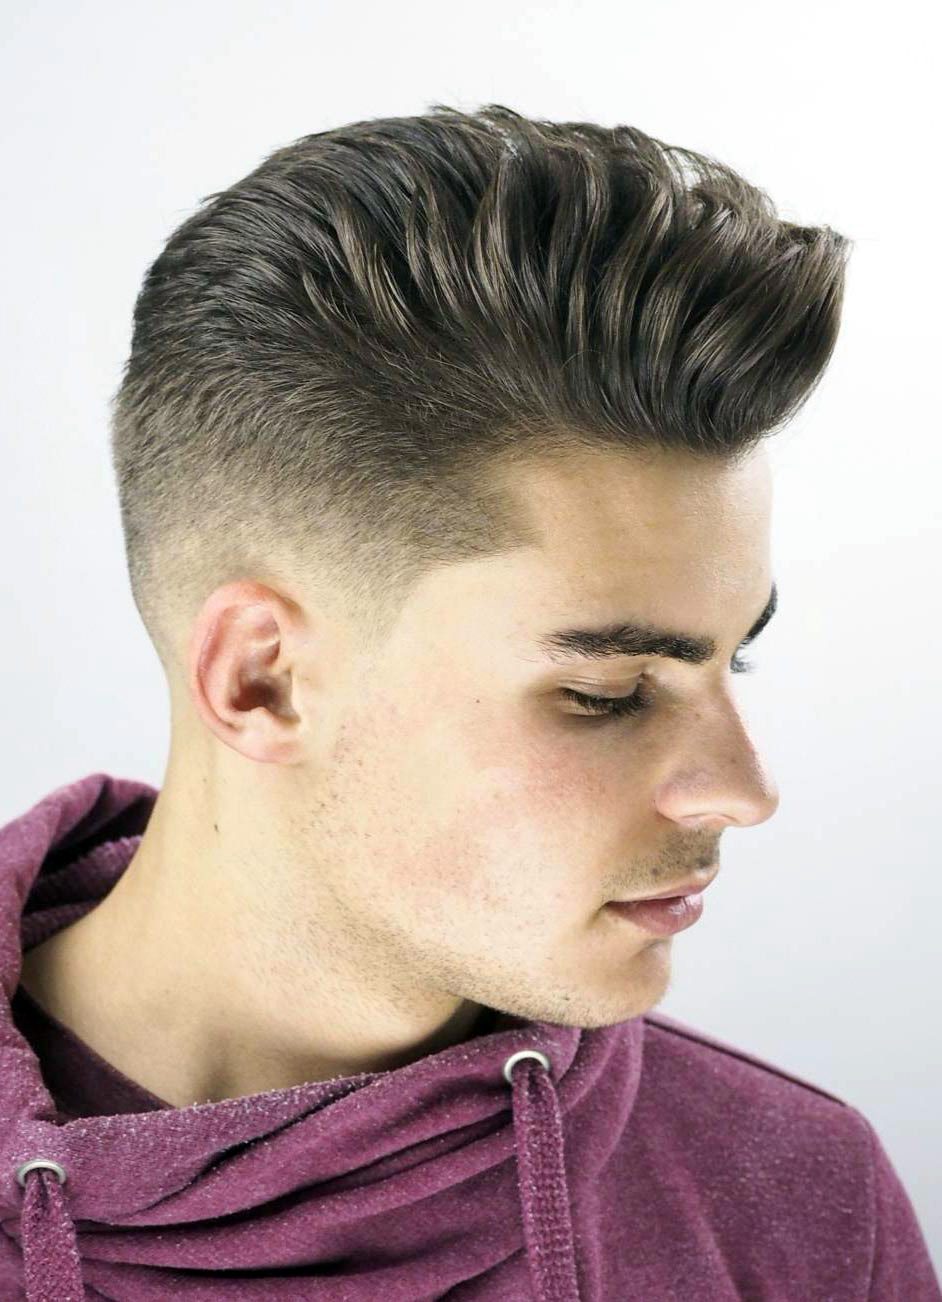 Low Fade with Styled Medium Top